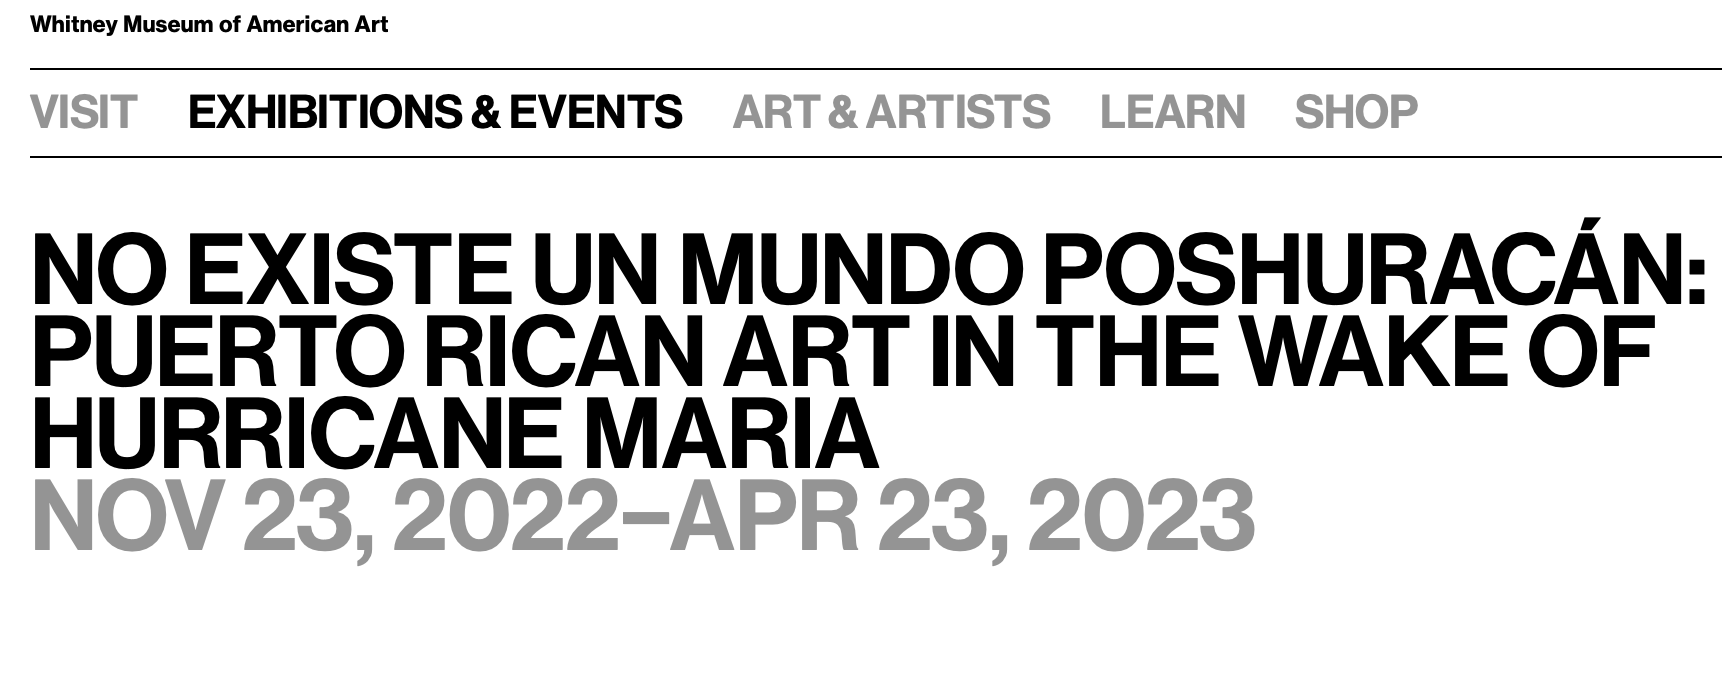 no existe mundo poshuracán: Puerto Rican Art in the Wake of Hurricane Maria at the Whitney Museum of American Art